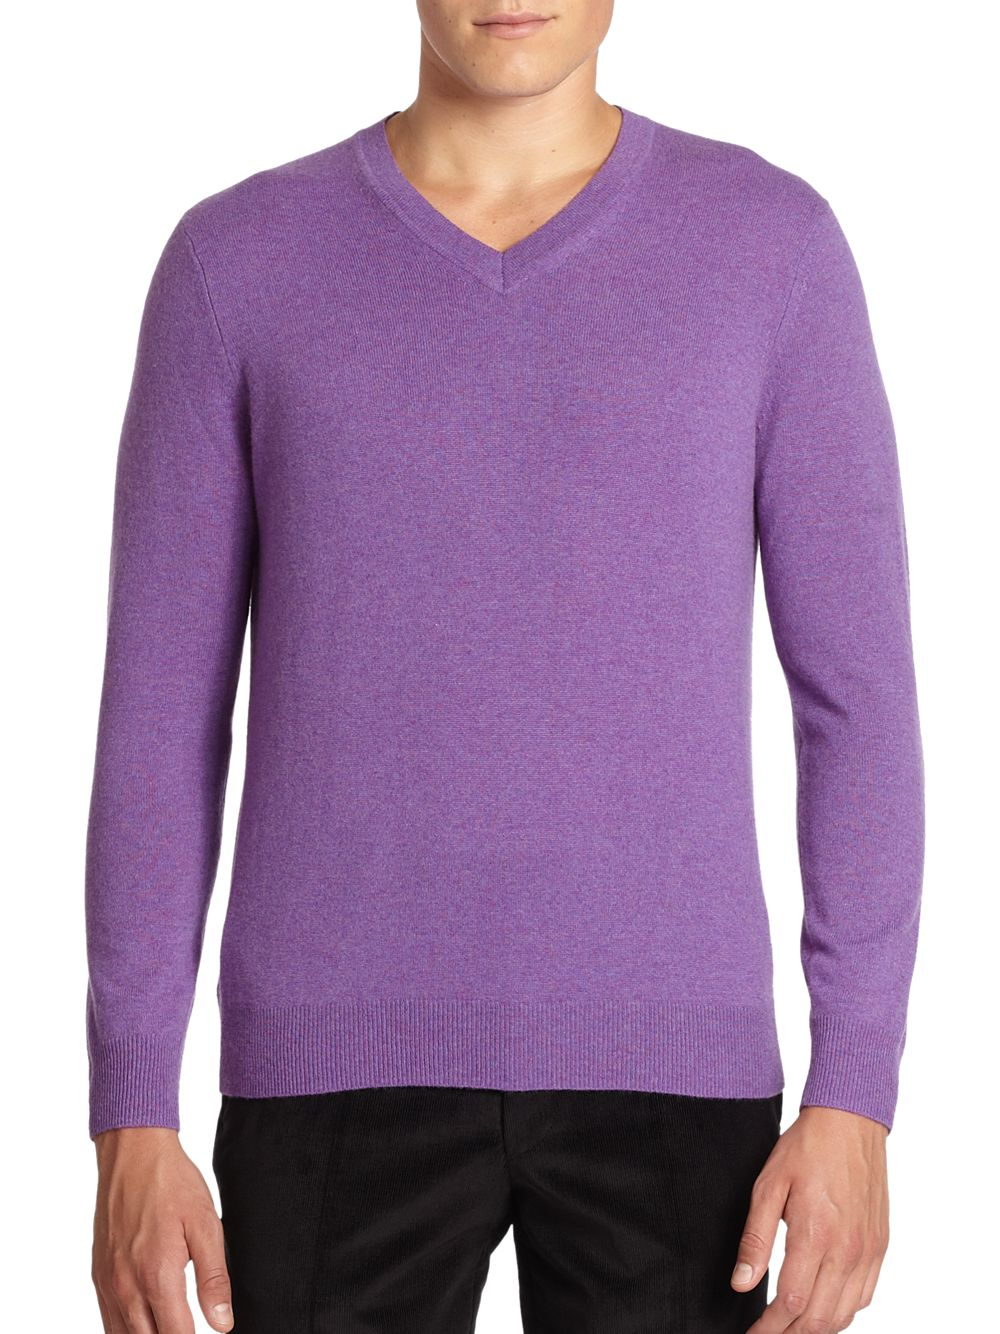 Lyst - Saks Fifth Avenue Cashmere V-neck Sweater in Purple for Men